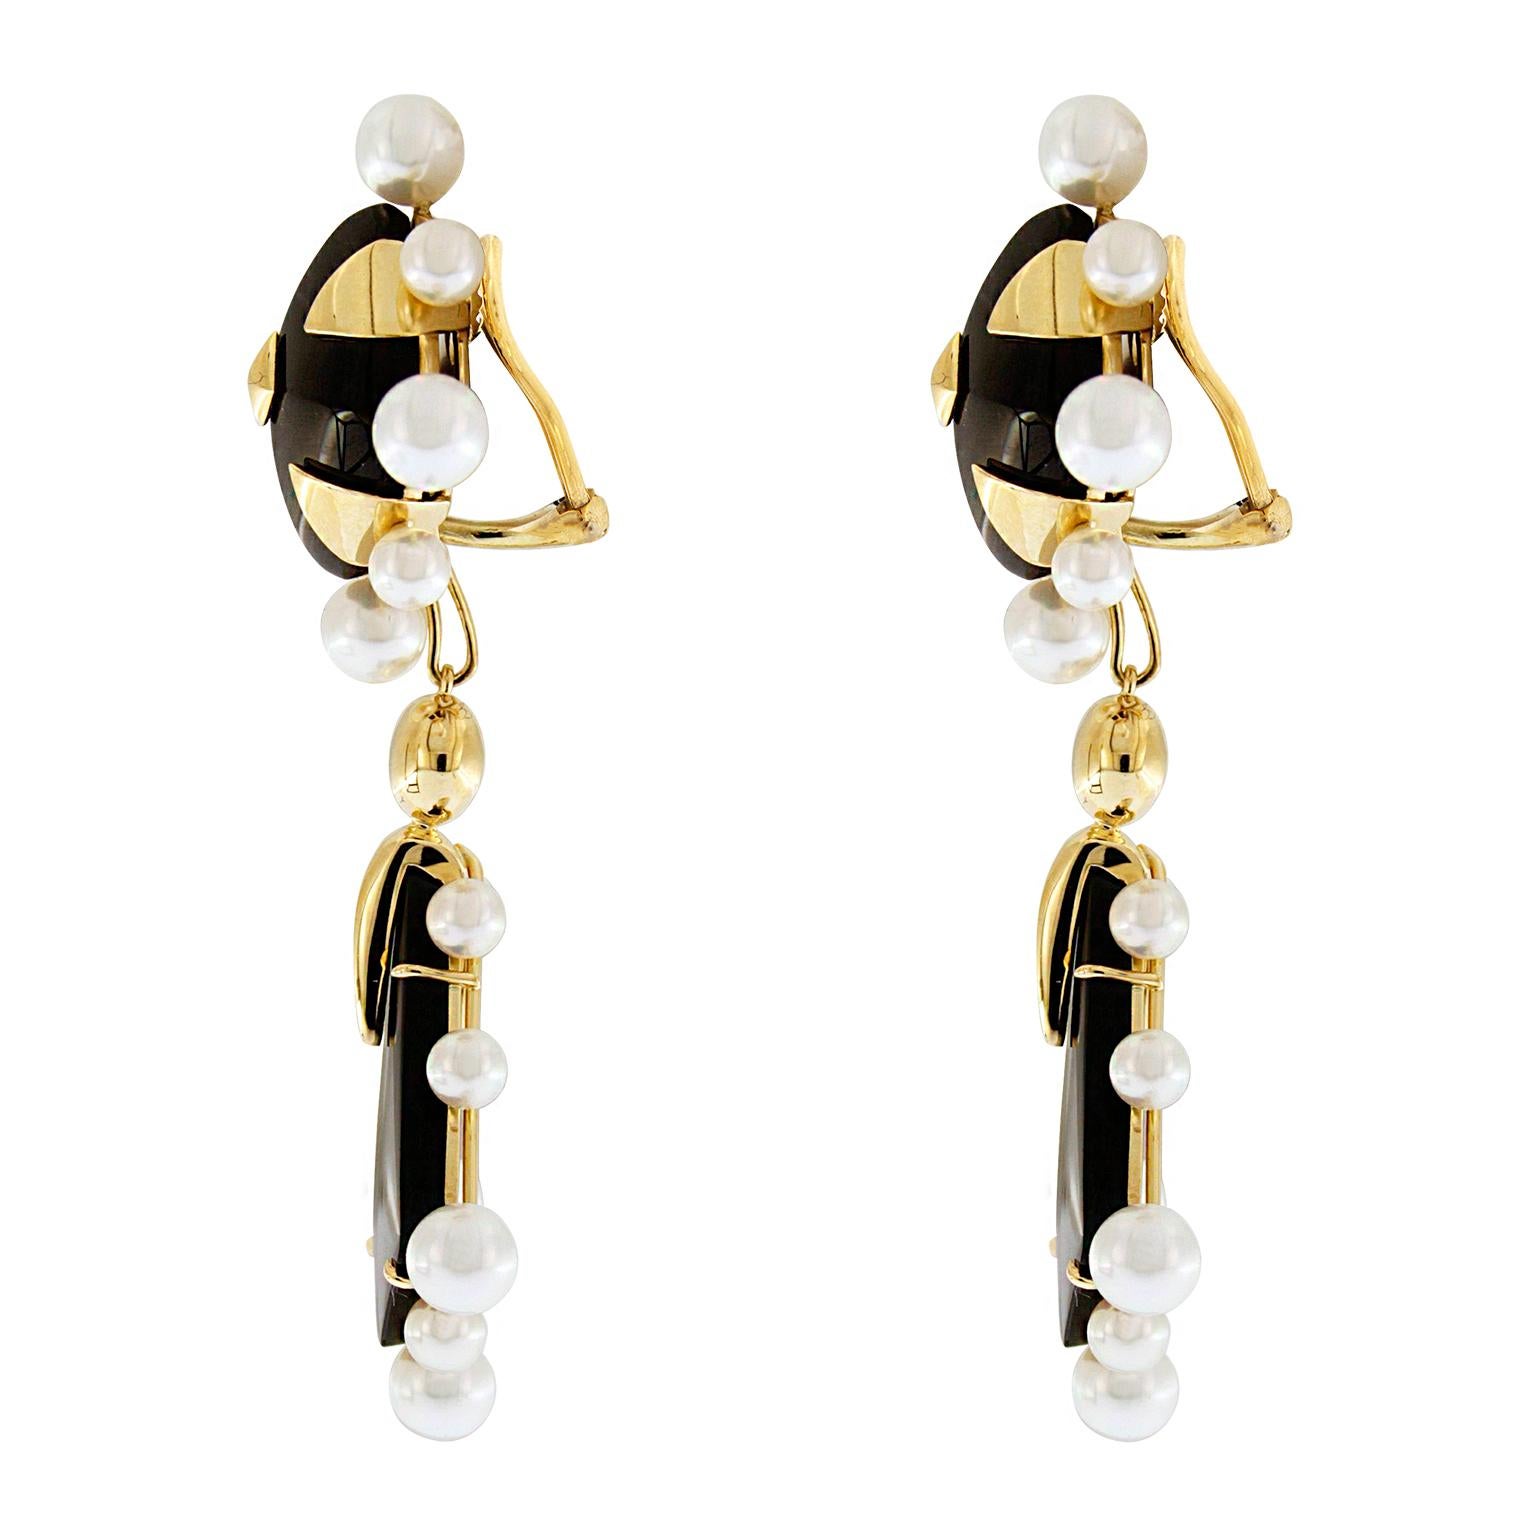 Onyx cushion and removable drop earrings with different sizes of Akoya pearls around them. It is finished in 18kt yellow gold with clip backs.